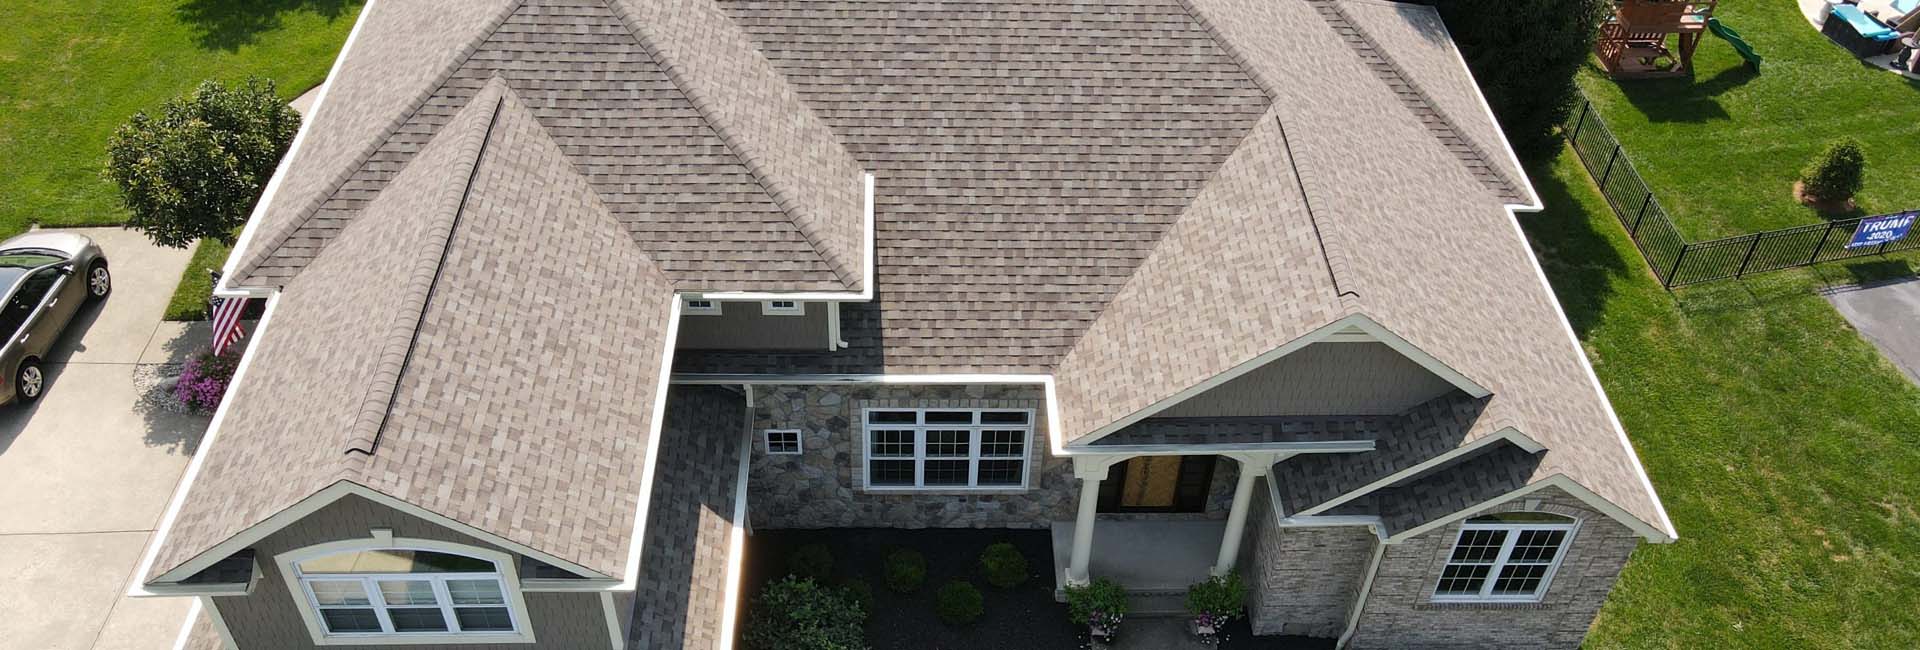 Exterior Construction - Large Home View From Above Showing Roof